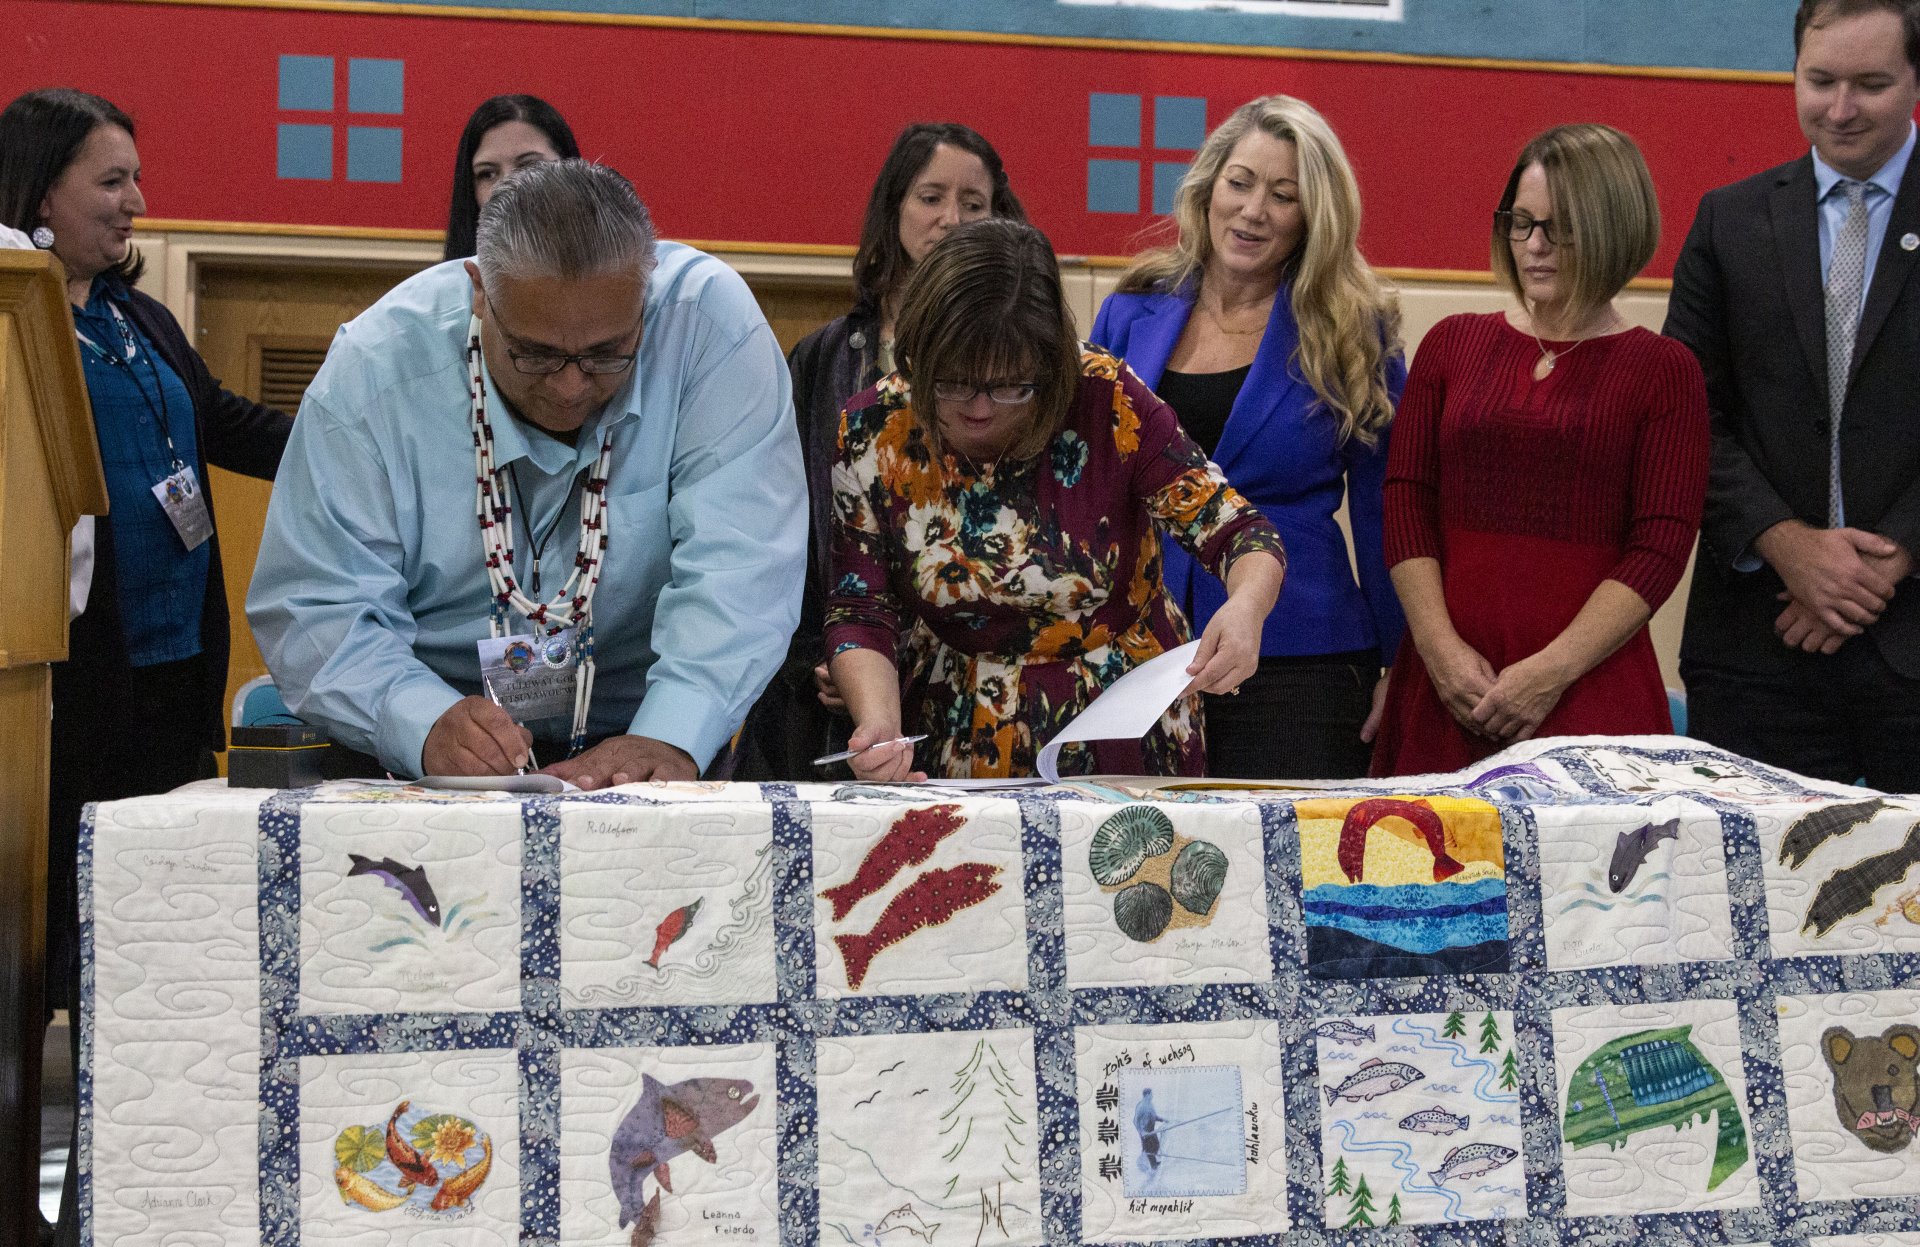 Wiyot Tribal Chairman Ted Hernandez and Eureka Mayor Susan Seaman sign papers on Oct. 21 to officially return Tuluwat Island to the Wiyot Tribe at the Adorni Center. | Photo by Thomas Lal